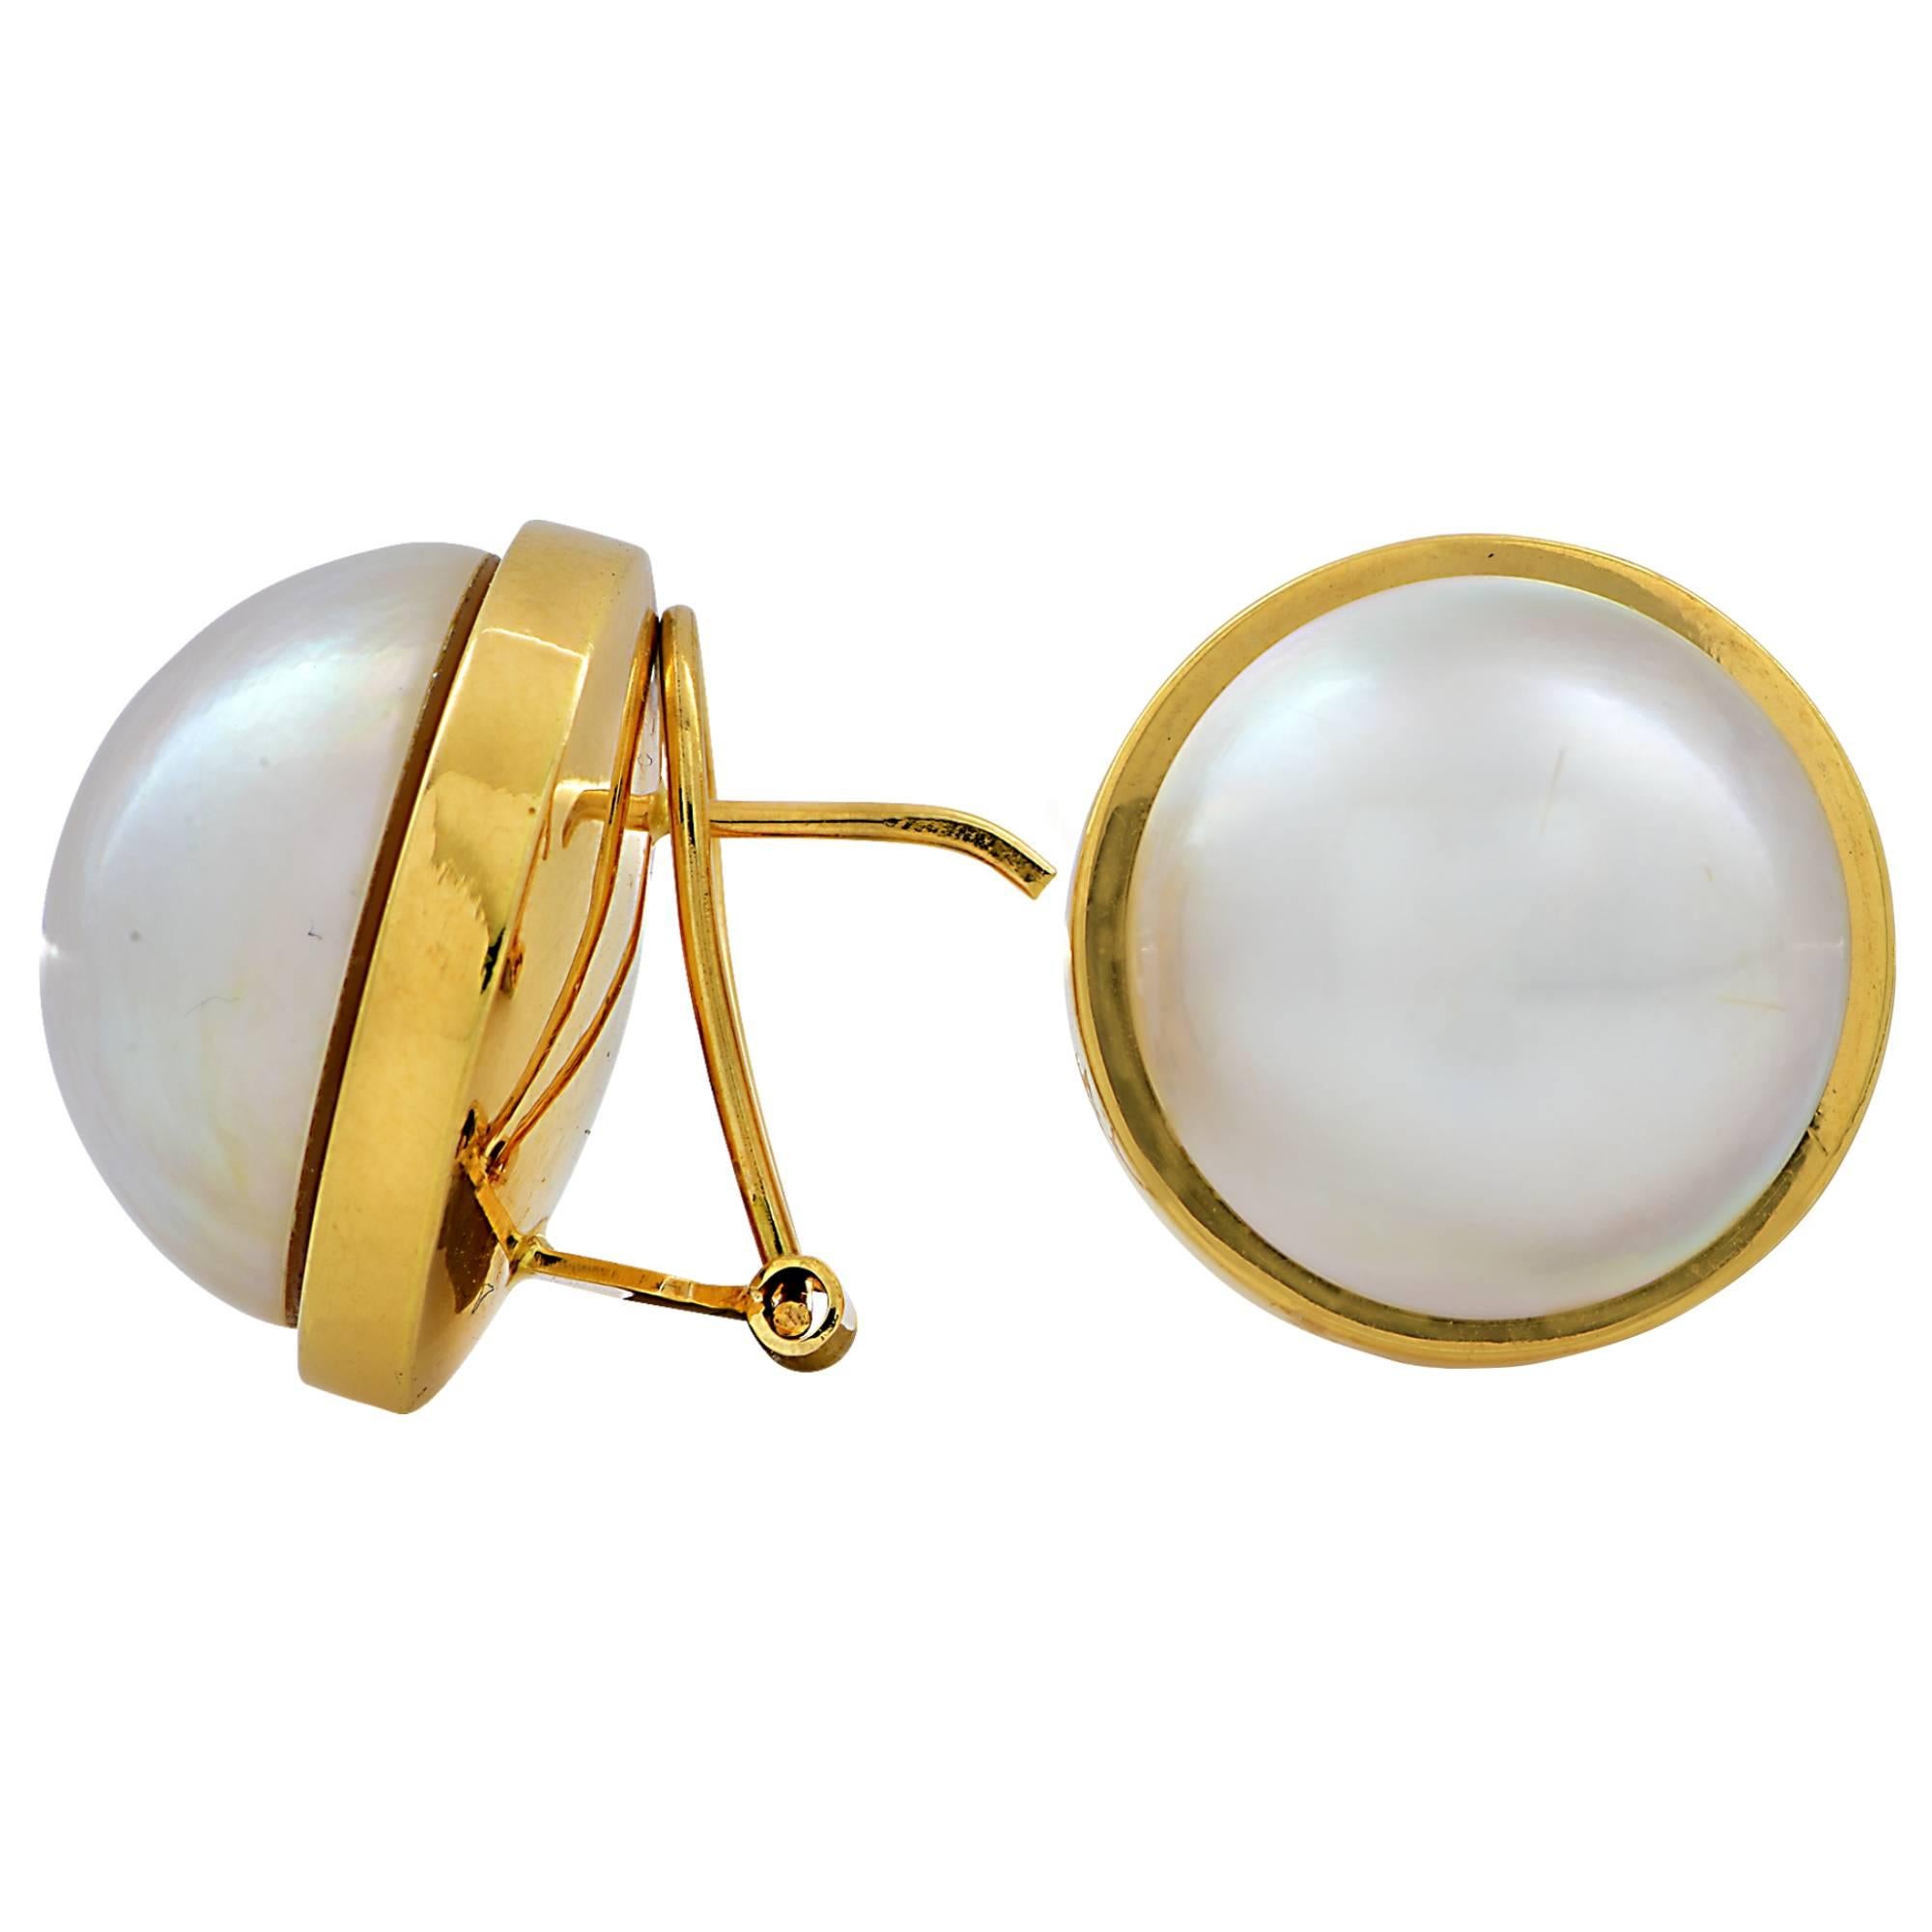 18k yellow gold earrings signed Riviera.

These earrings measure .78 inch in diameter.
It is stamped and/or tested as 18k gold.
The metal weight is 12.67 grams.

These pearl earrings are accompanied by a retail appraisal performed by a GIA Graduate